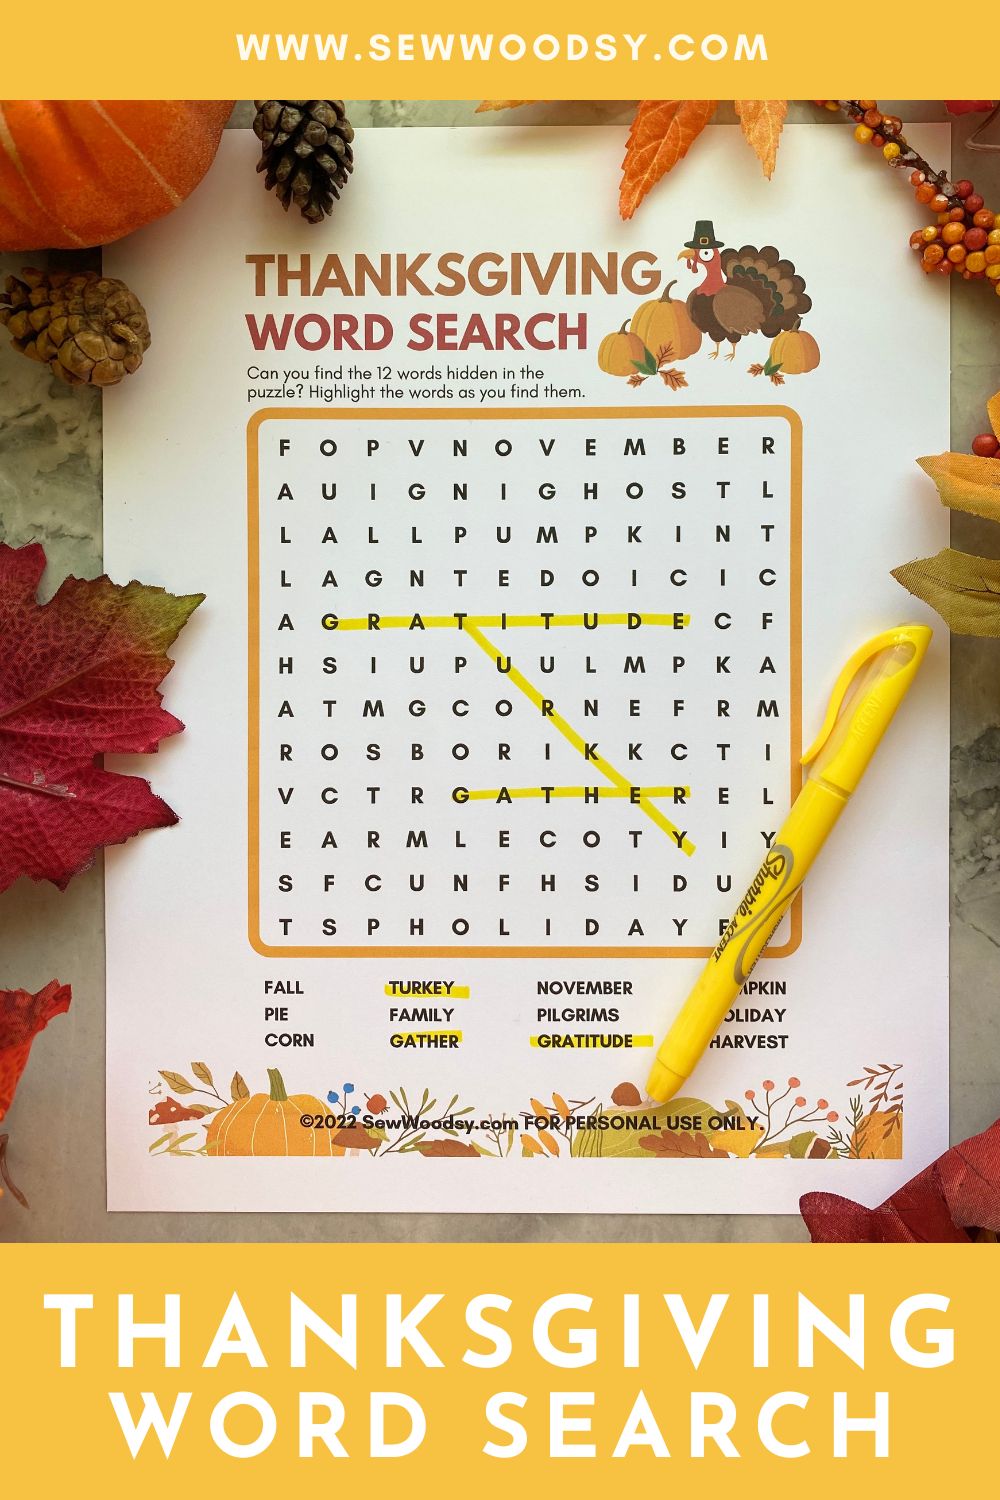 Word search paper witth yellow highlighted words with text on image for Pinterest.